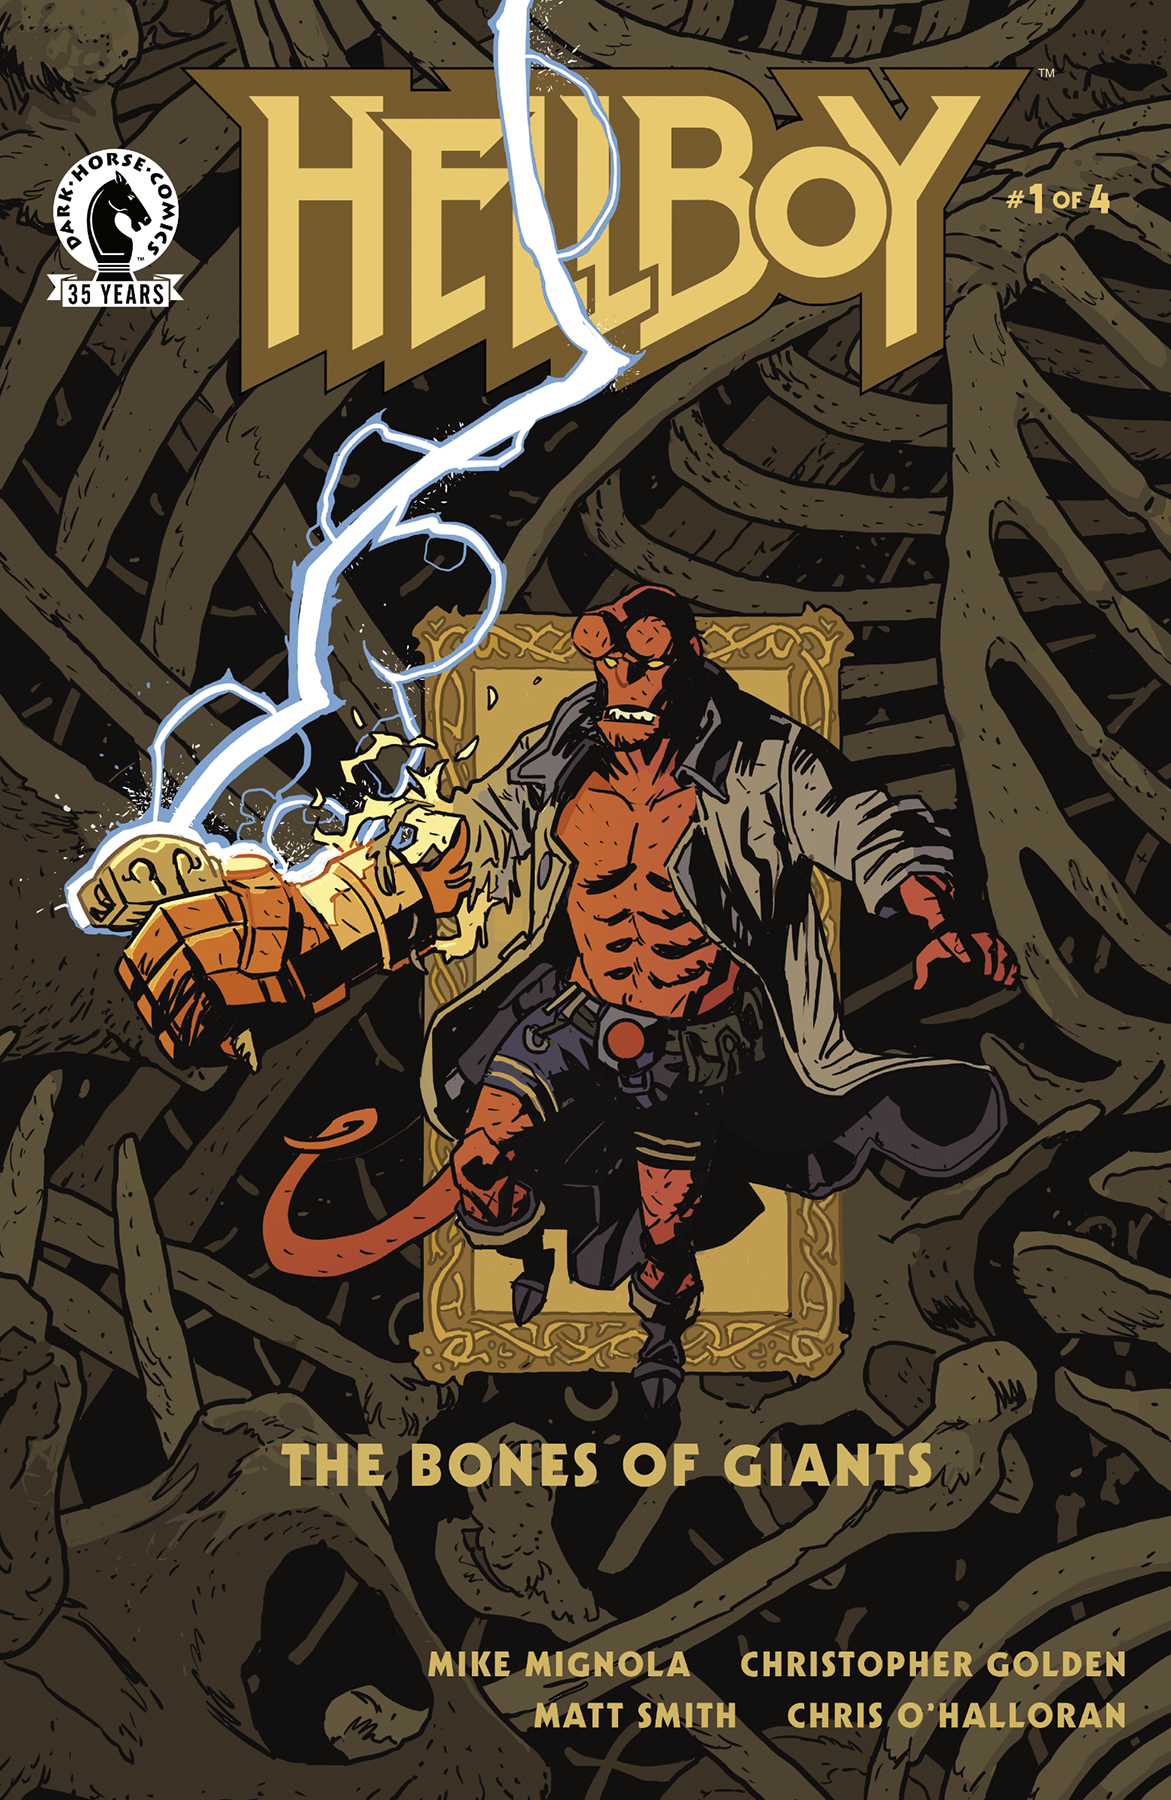 Hellboy & the B.P.R.D. Ongoing #49 Bones of Giants #1 (Of 4)